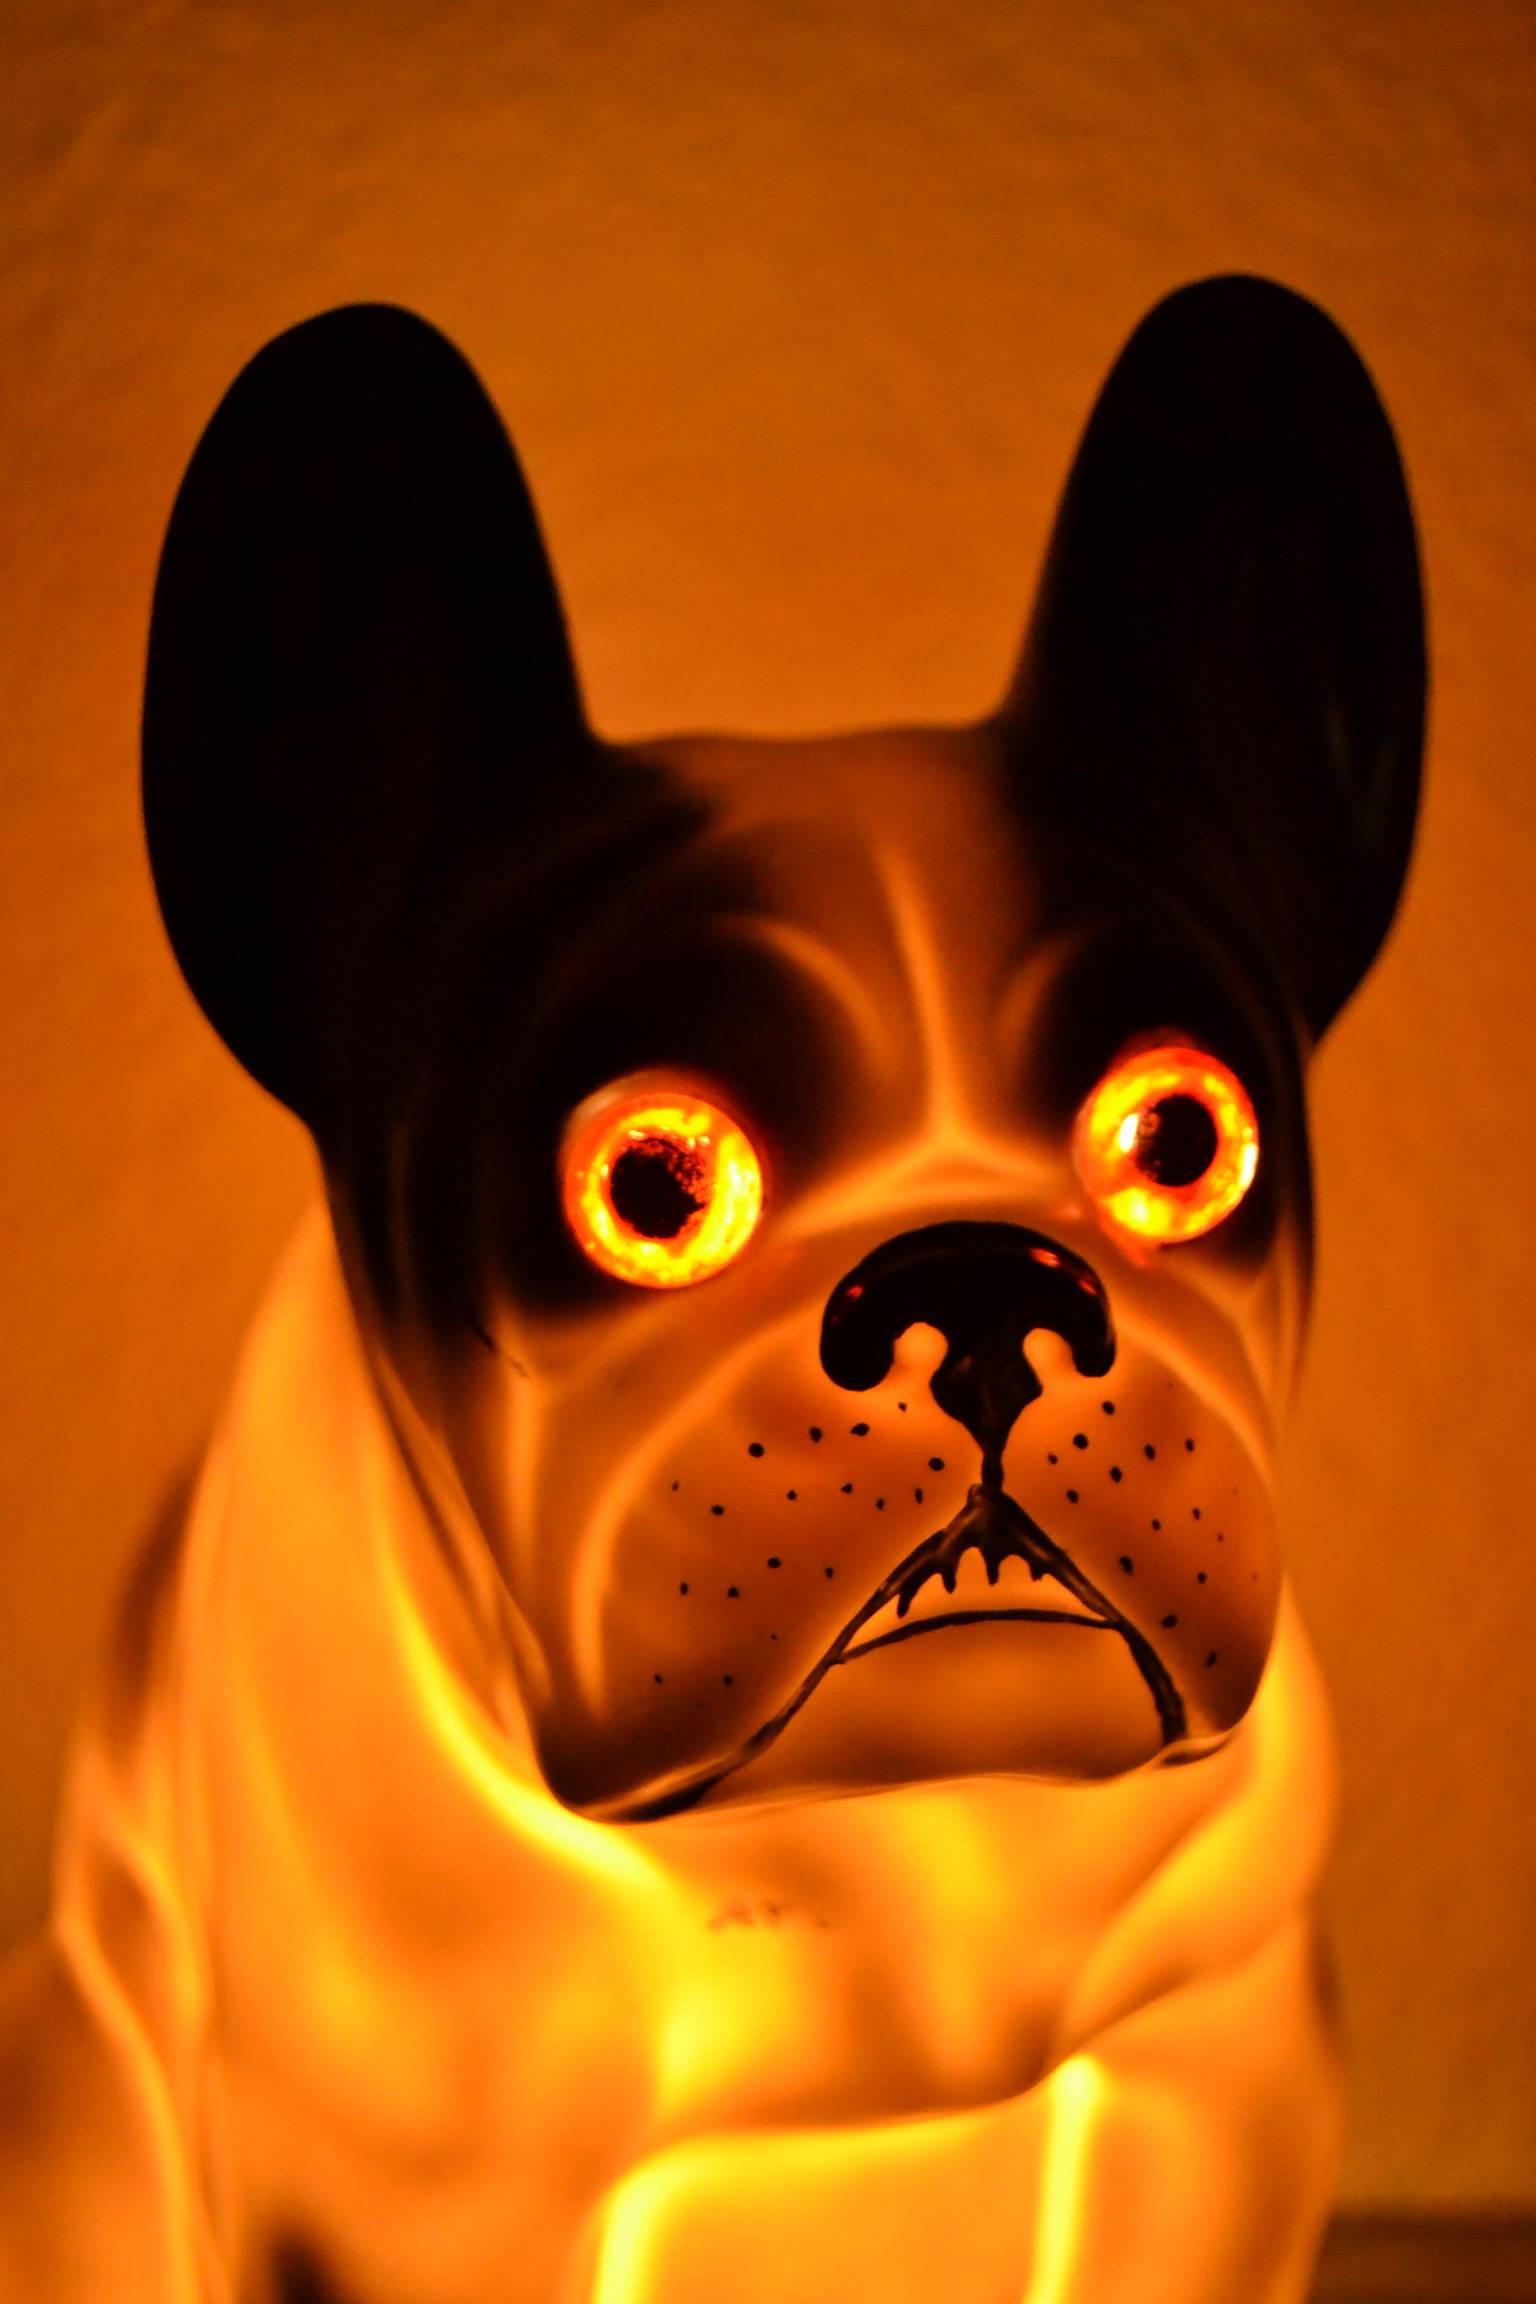 Awesome antique perfume lamp - nightlight dog figural French Bulldog - Frenchie .
Made of porcelain with beautiful big orange glass eyes. 
This bulldog is ready to have a special and warm welcome by a French Bulldog lover, probably a member of the